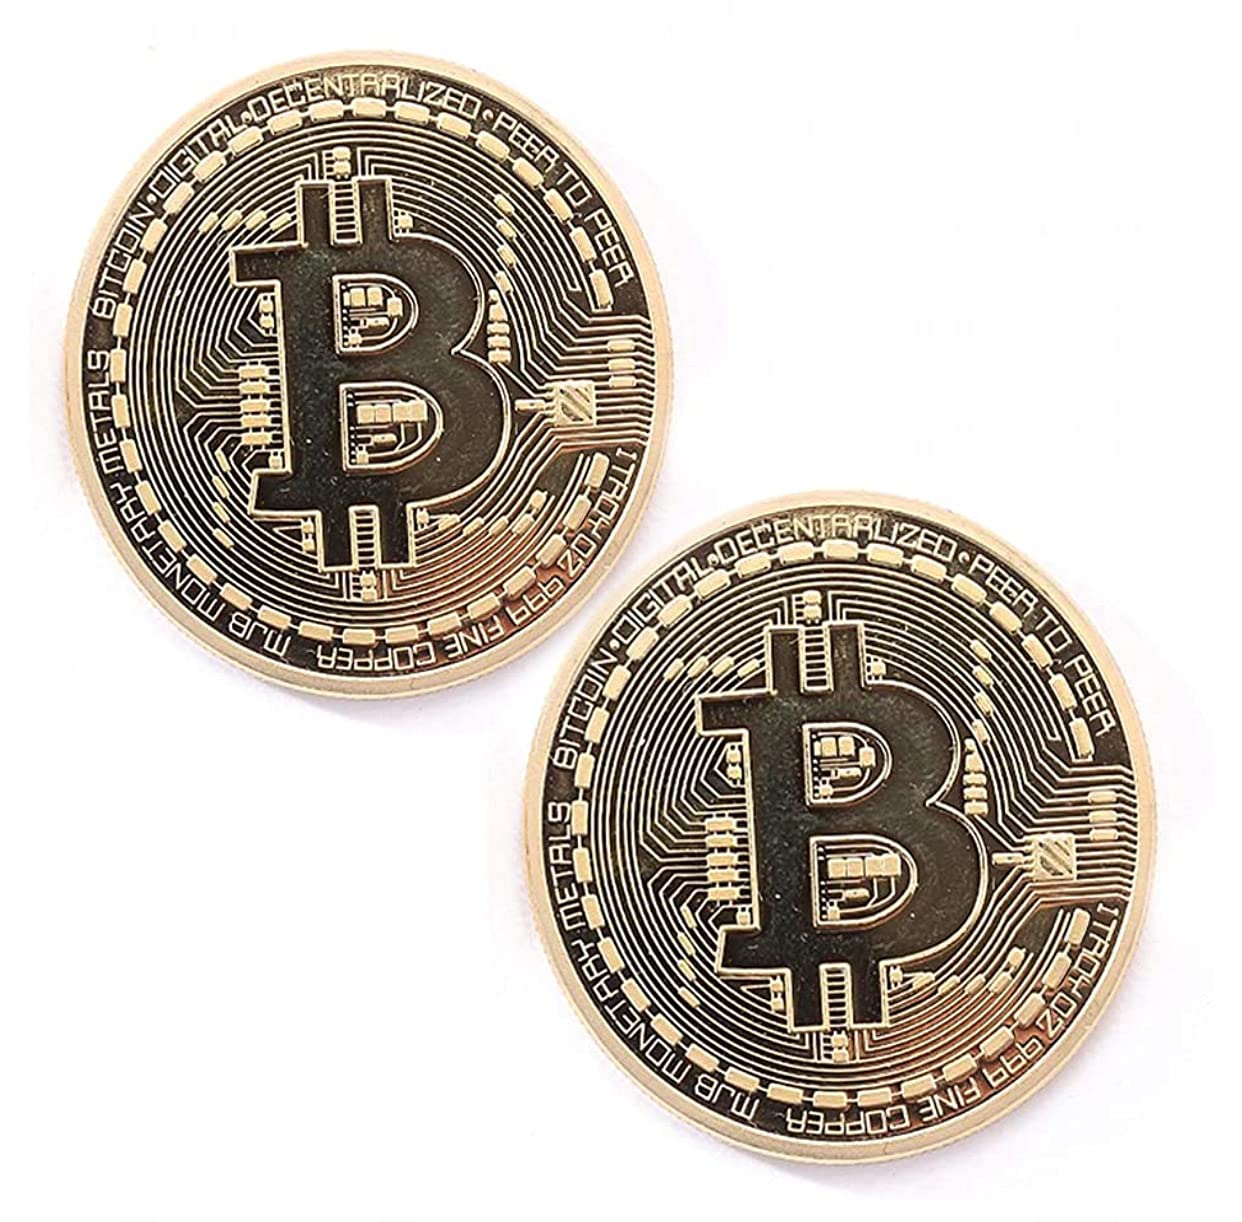 blinkee Set of 2 - Gold Plated Collectible Bitcoin Coin Physical Art Collection Gift